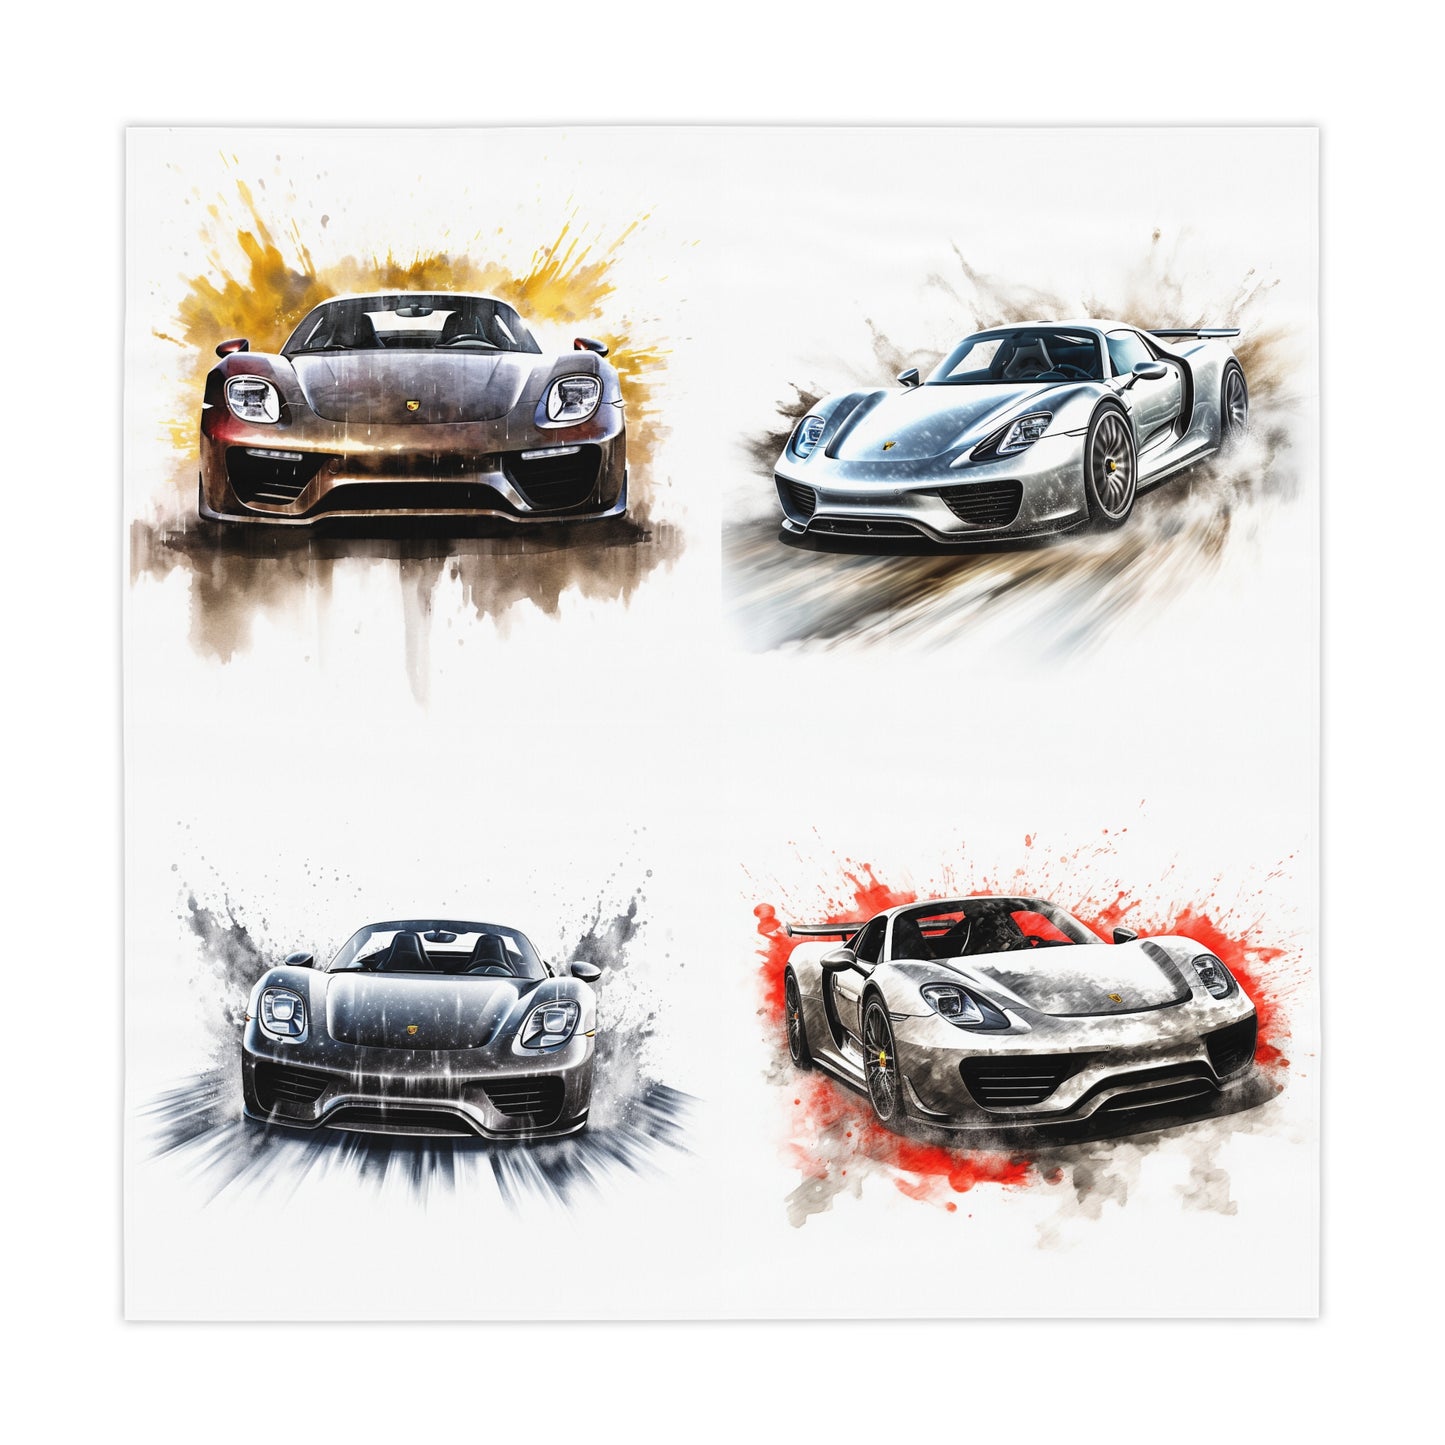 Tablecloth 918 Spyder white background driving fast with water splashing 5